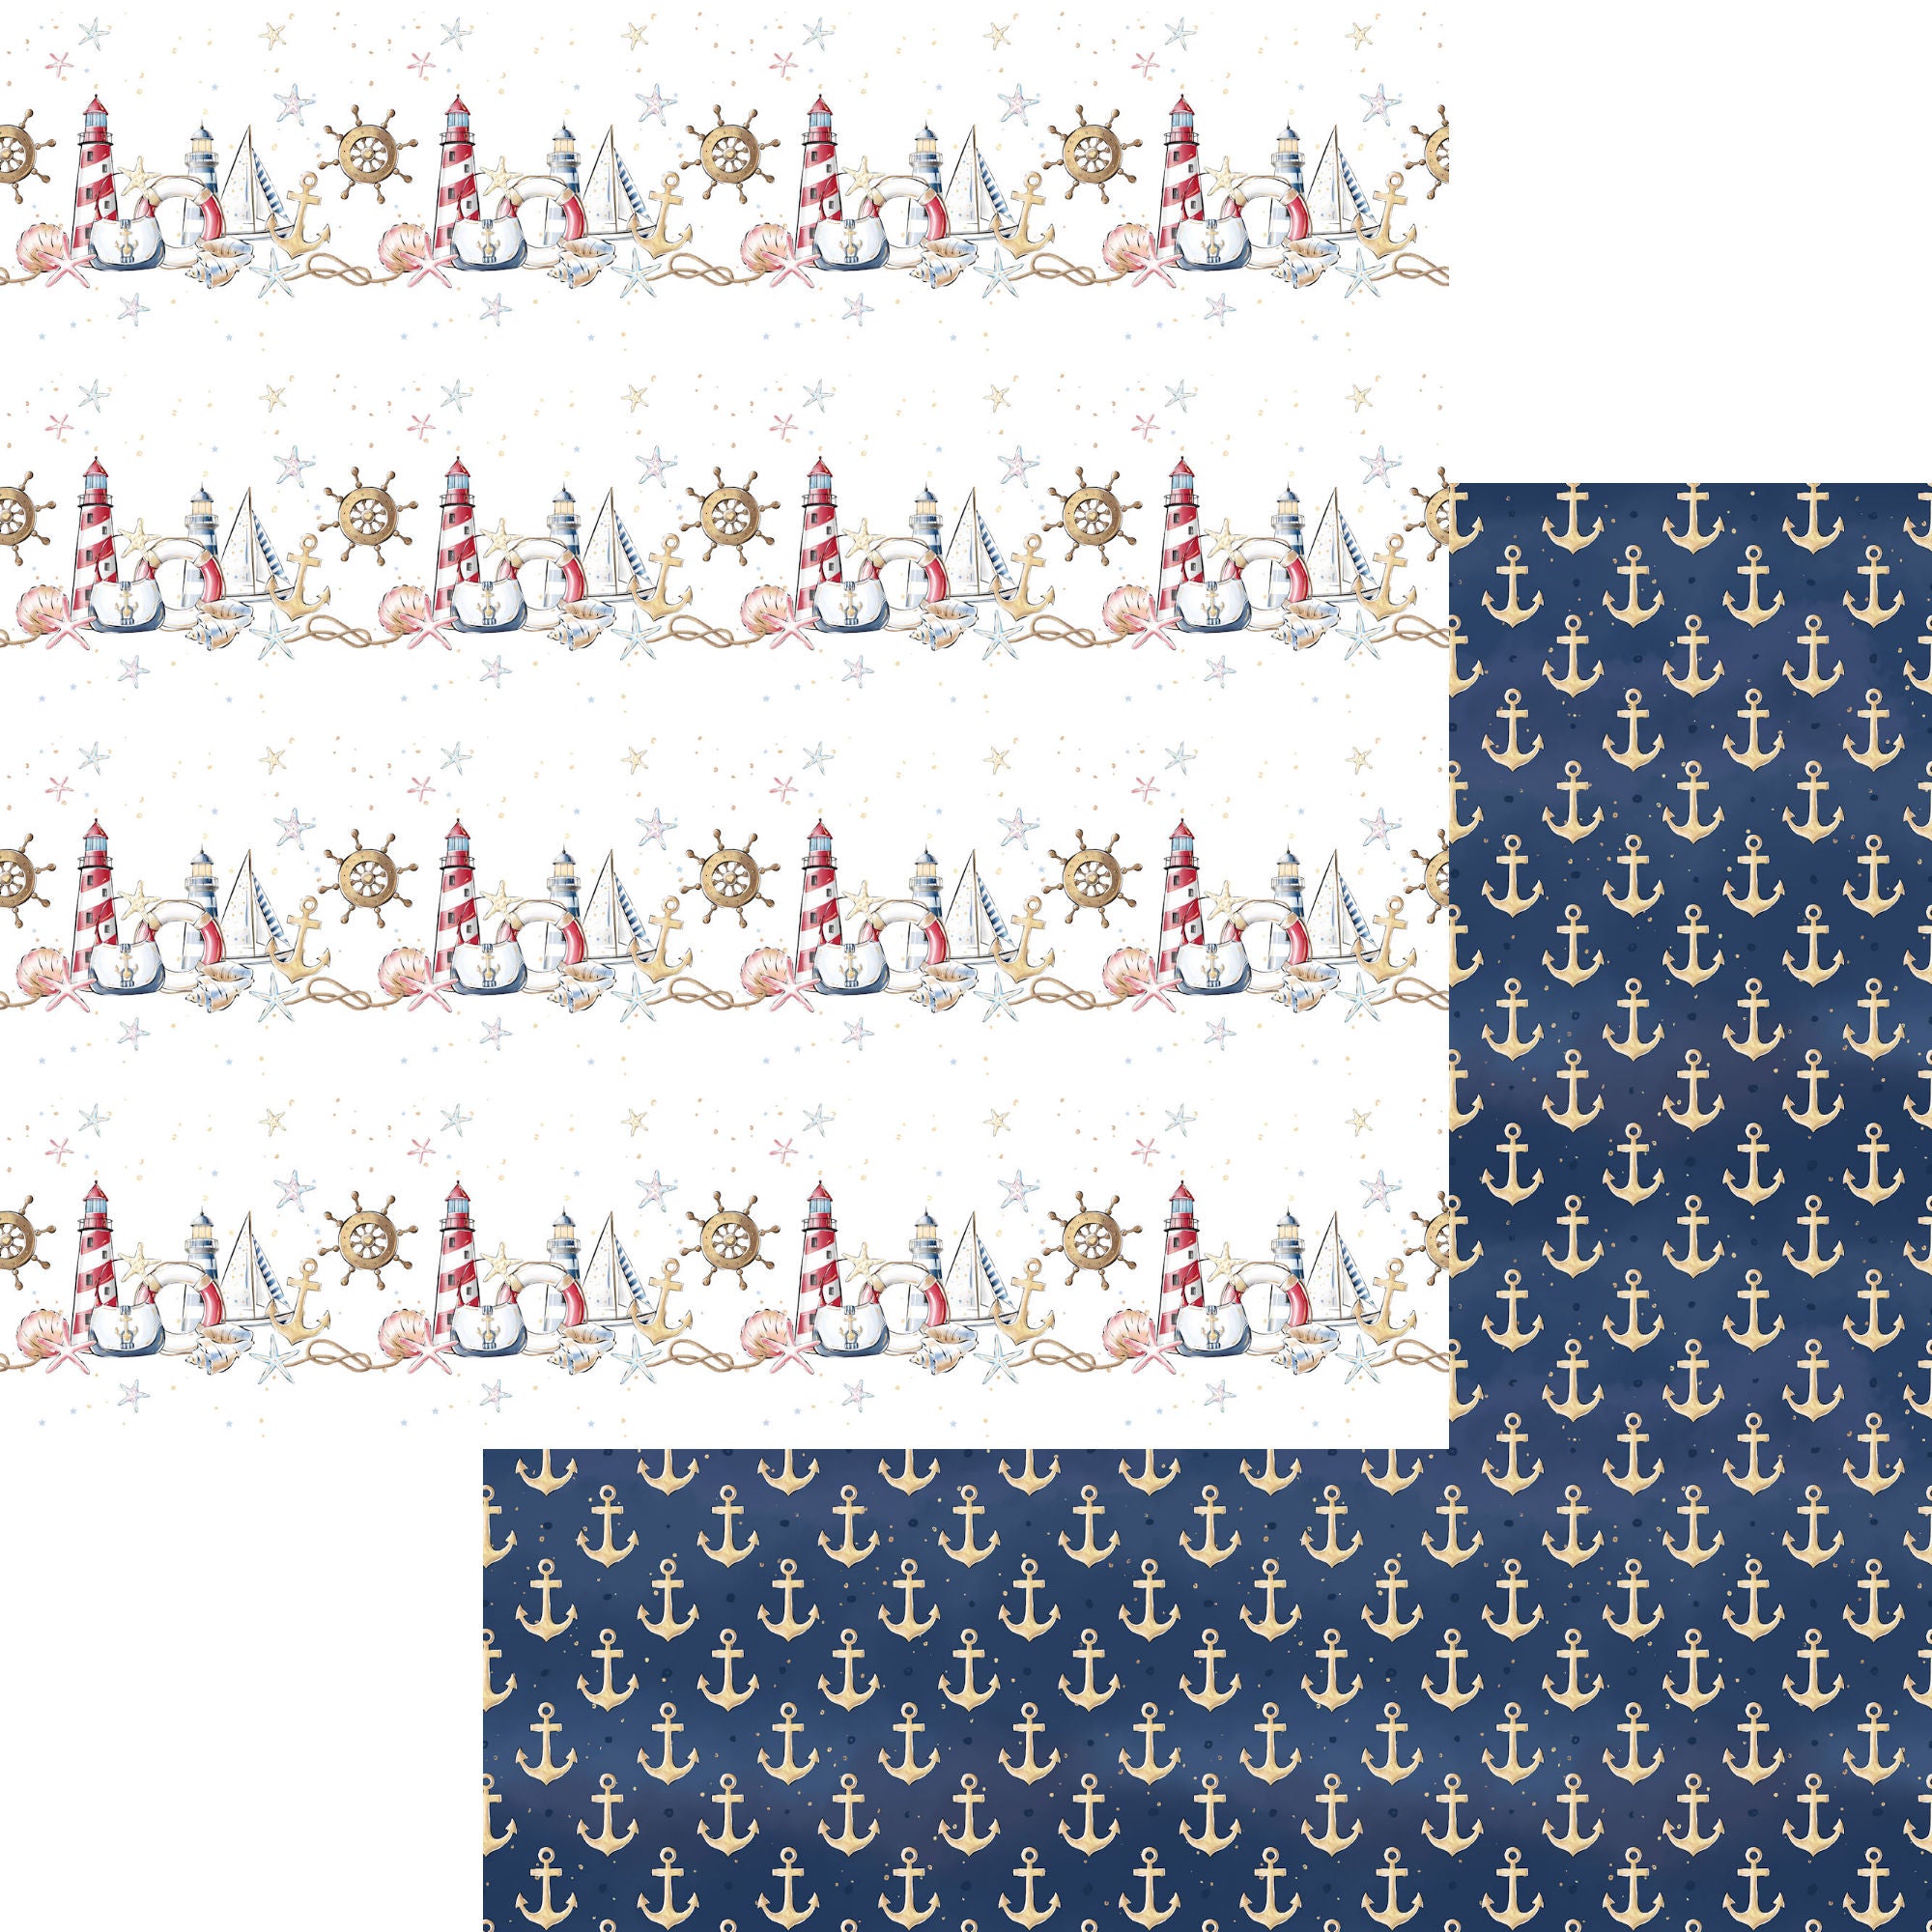 Nautical Summer Collection Lighthouses By The Seashore 12 x 12 Double-Sided Scrapbook Paper by SSC Designs